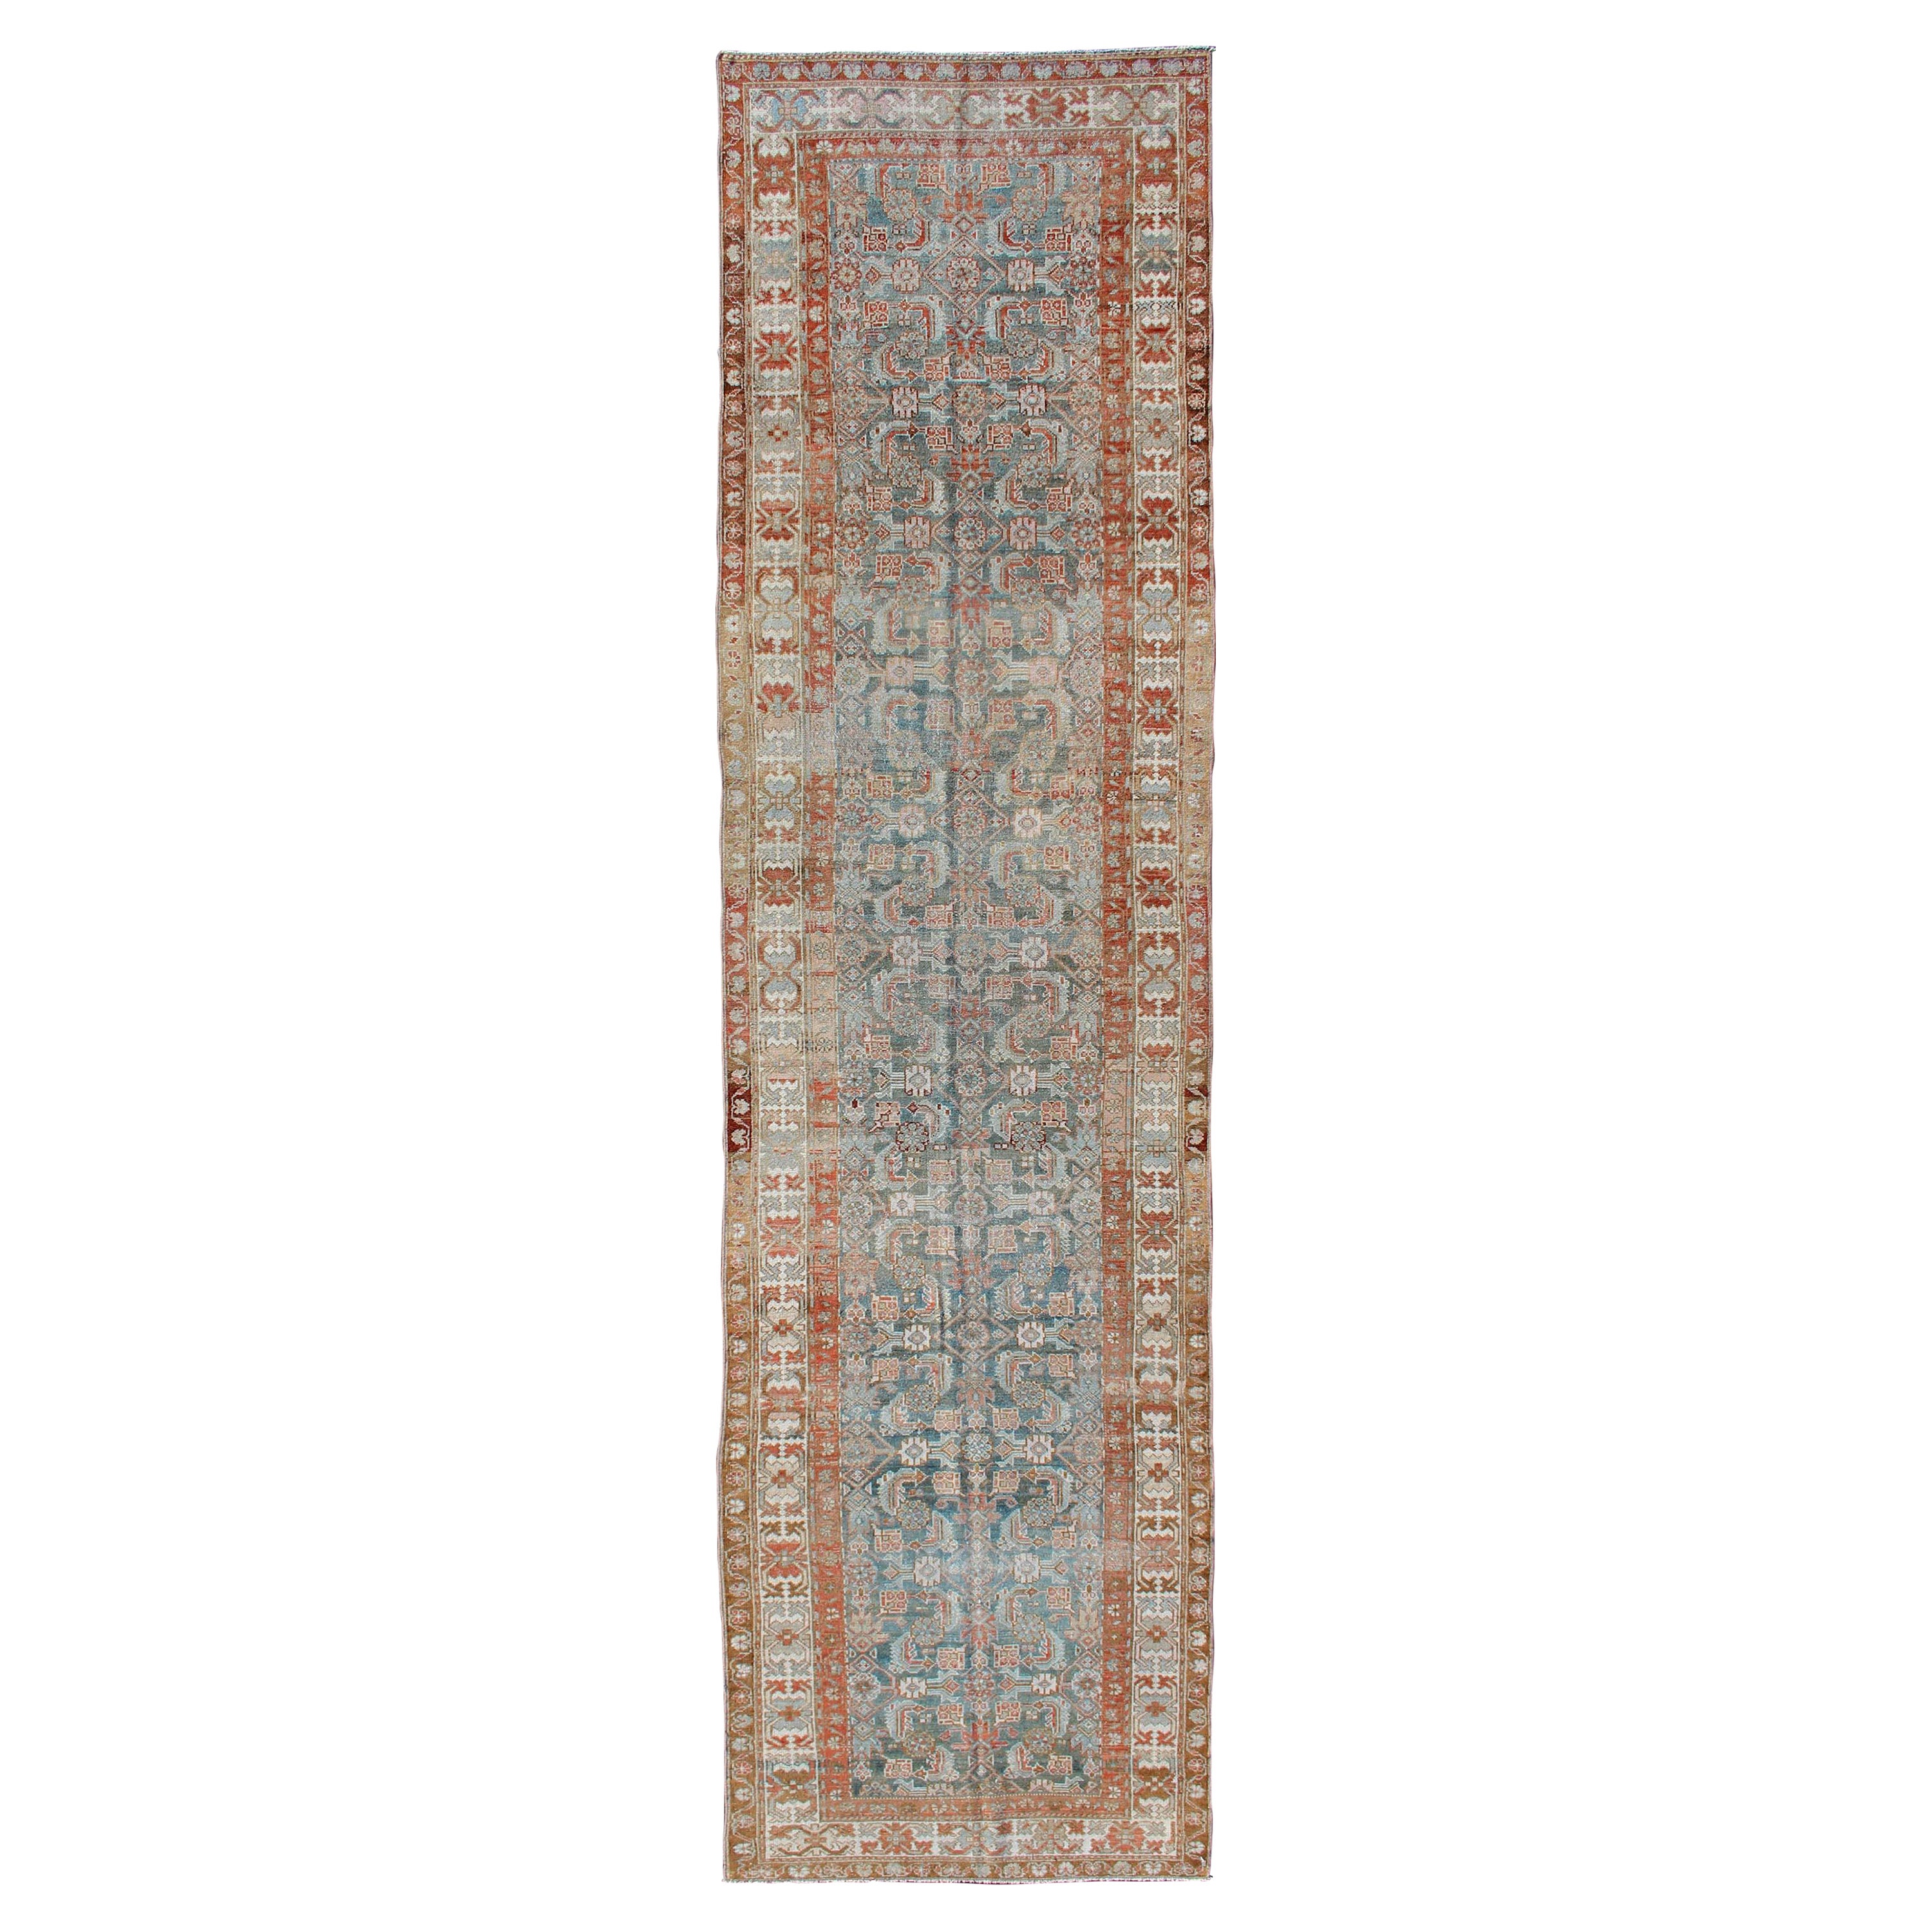 Antique Persian Hamedan Runner with Sub-Geometric Design Earth Tones with Red